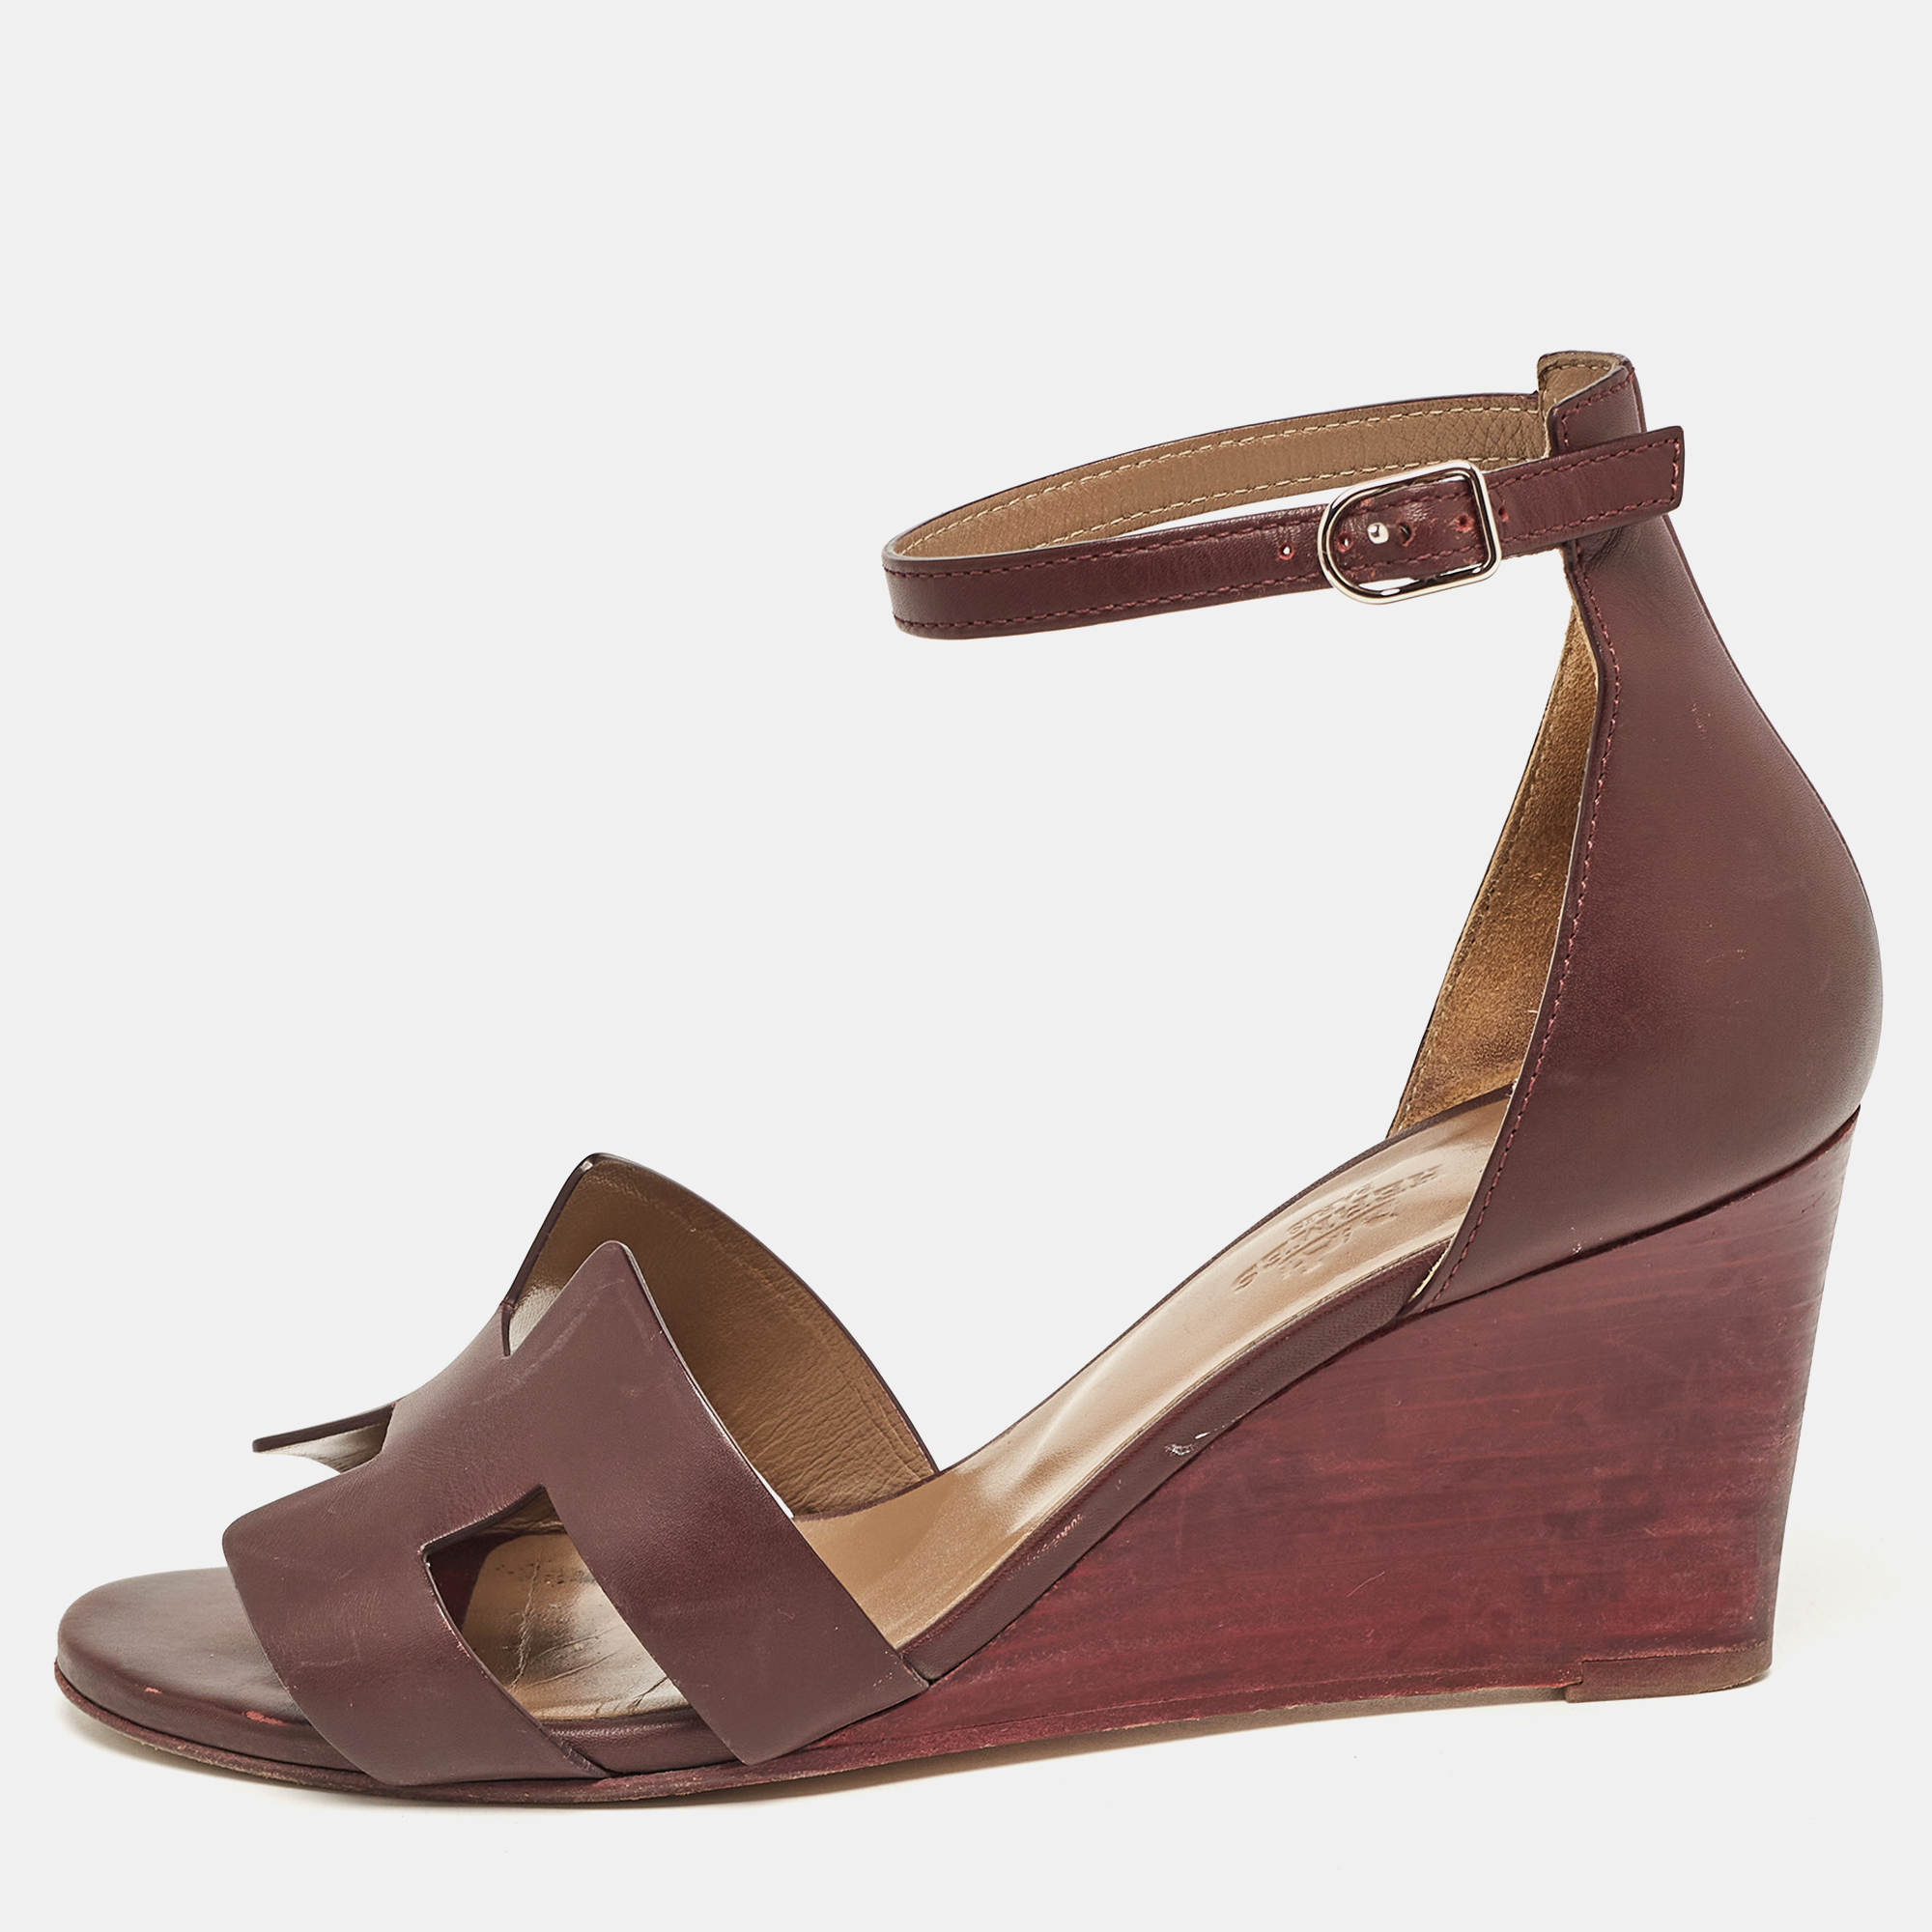 Pre-owned Hermes Burgundy Leather Legend Wedge Sandals Size 37.5